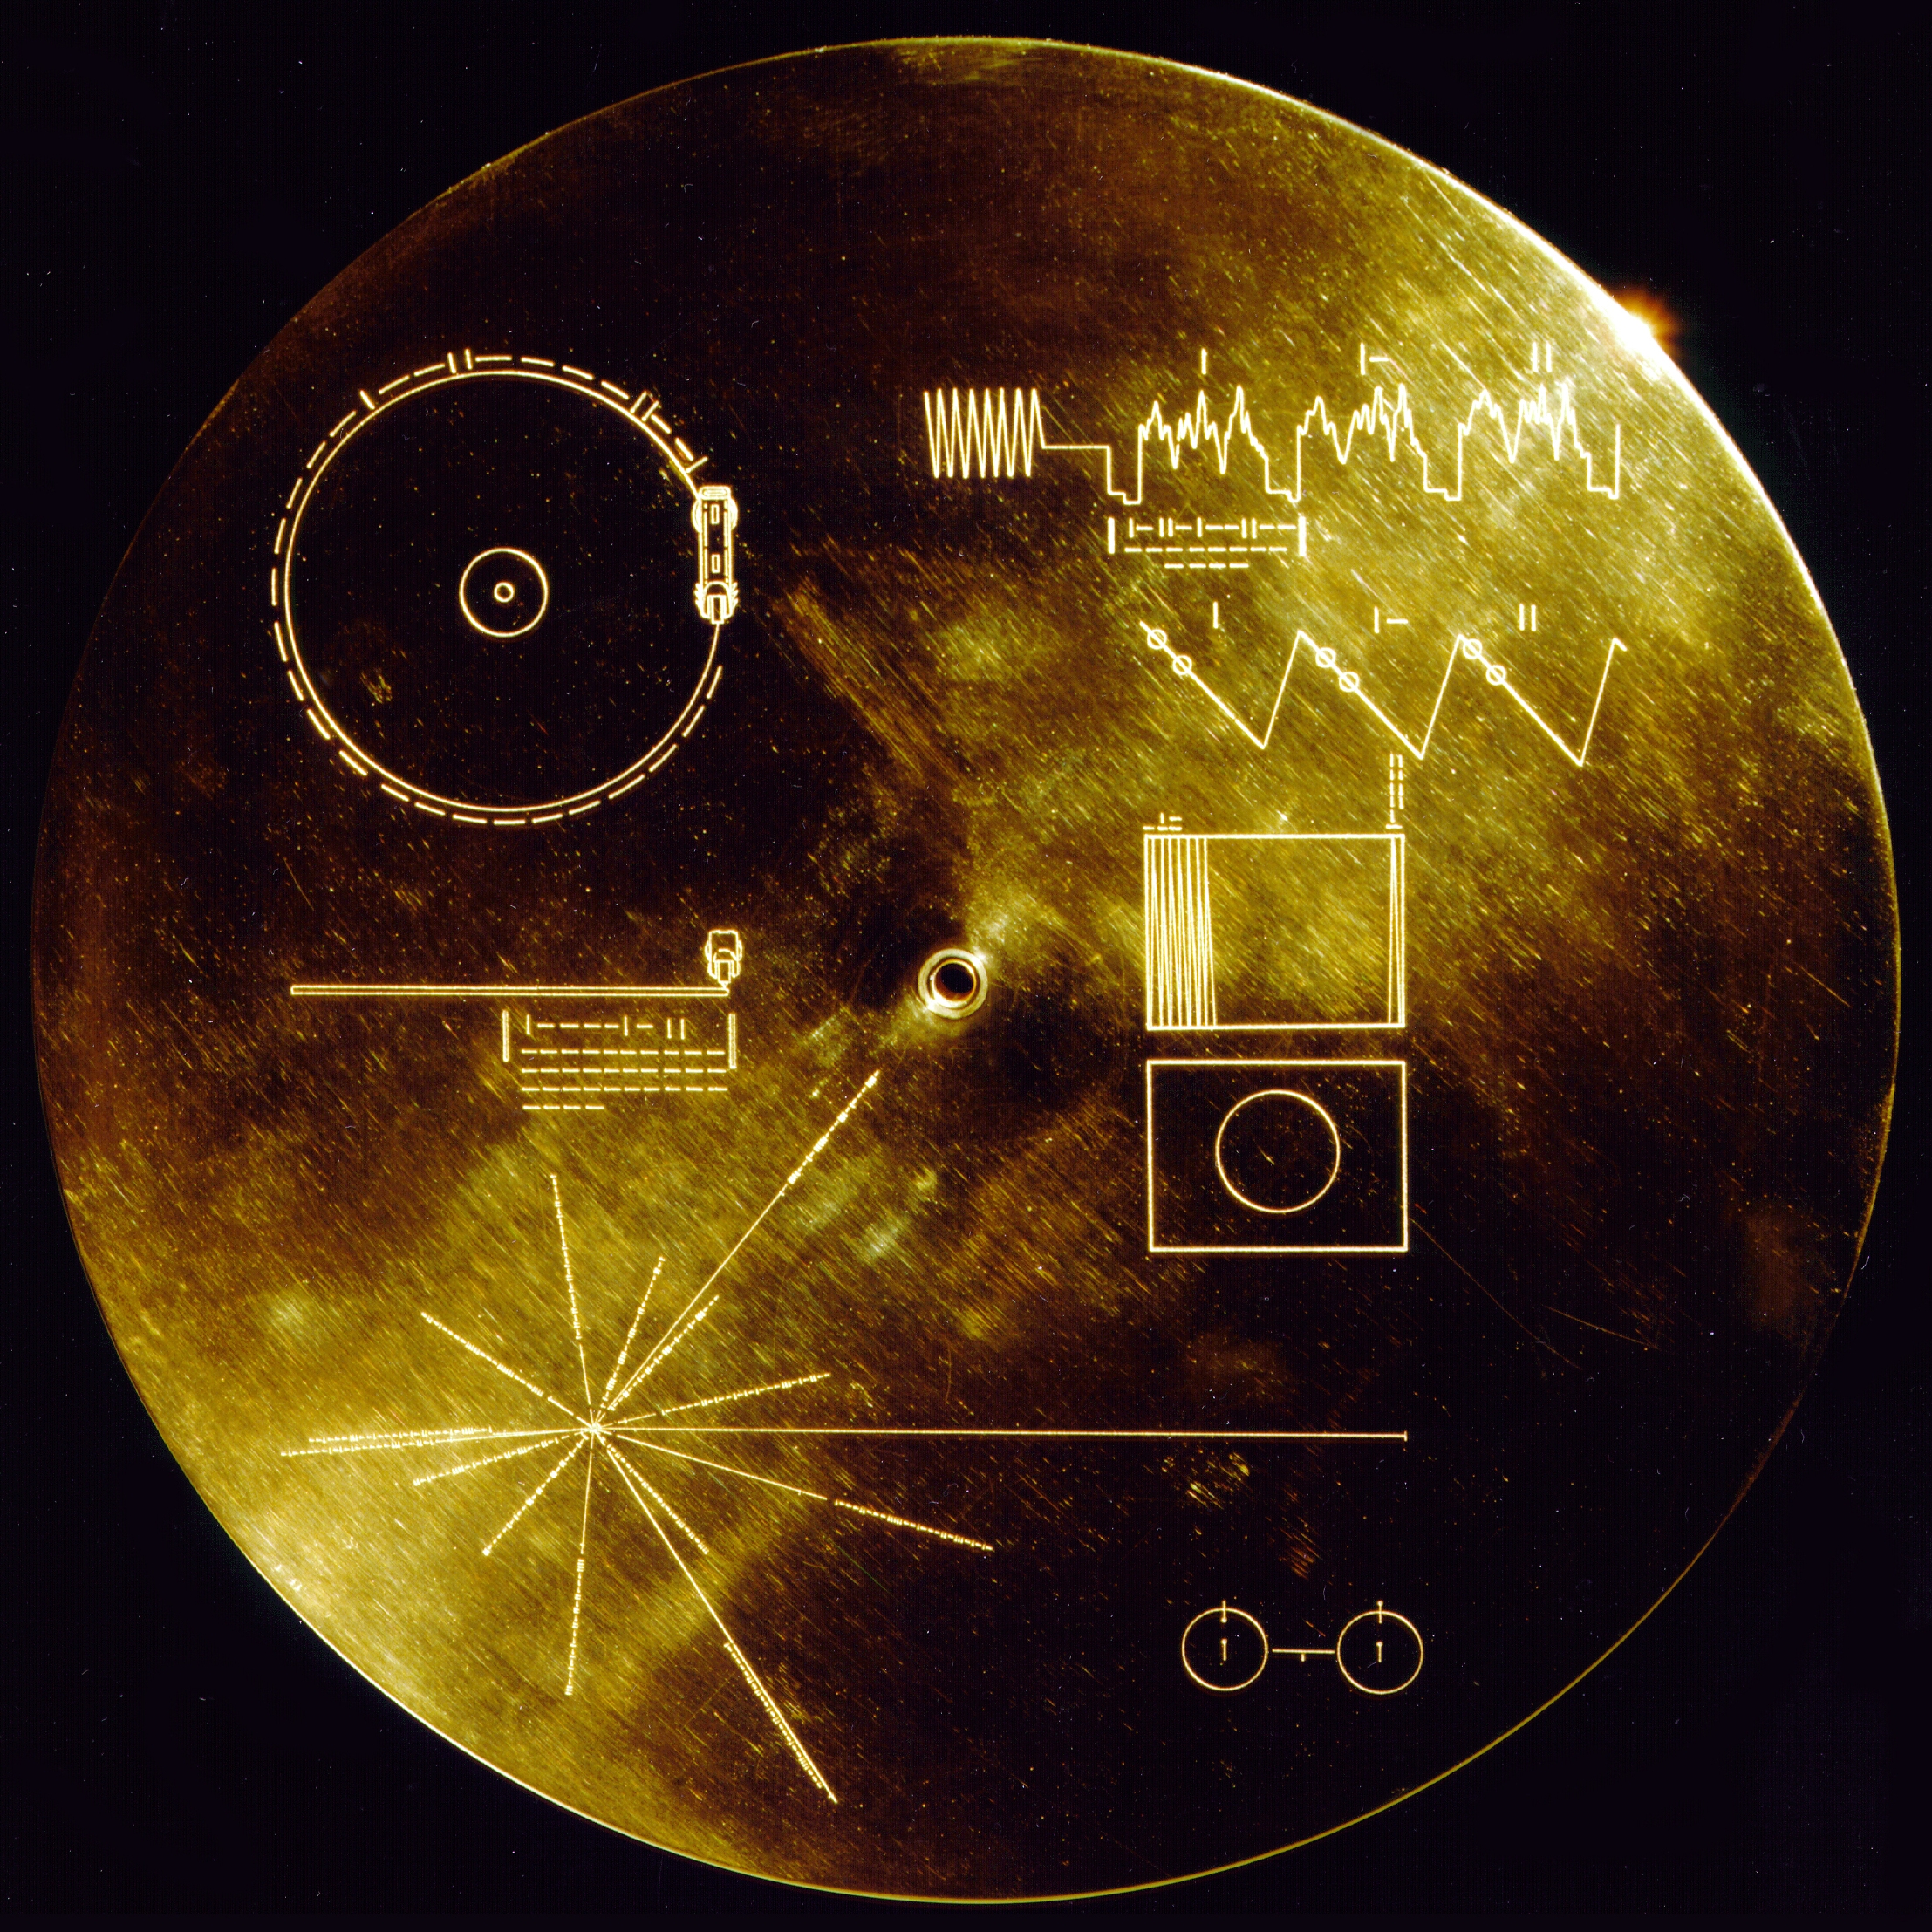 The Golden record - Inspiration for the splines based on the etched binary code.